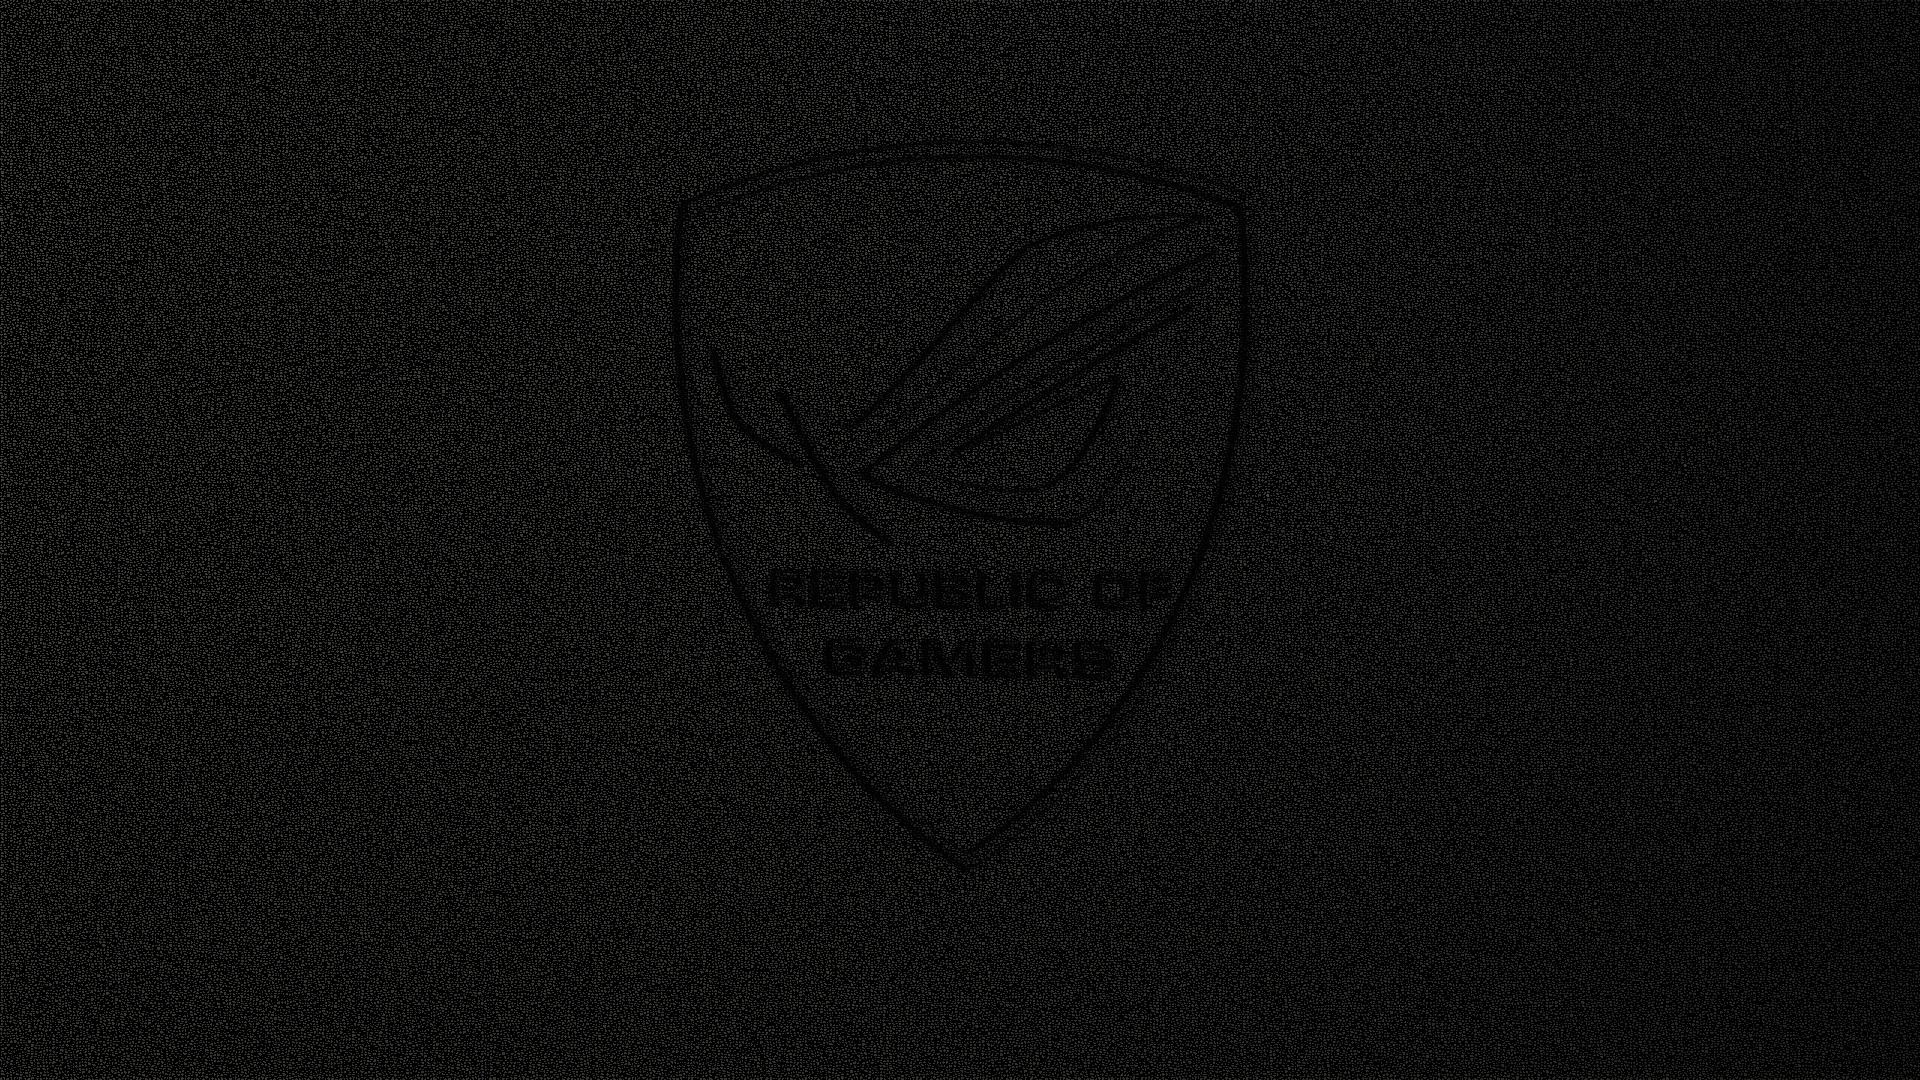 1920x1080 New-Republic-Of-Gamers-Wallpaper-by-NeoprodFX